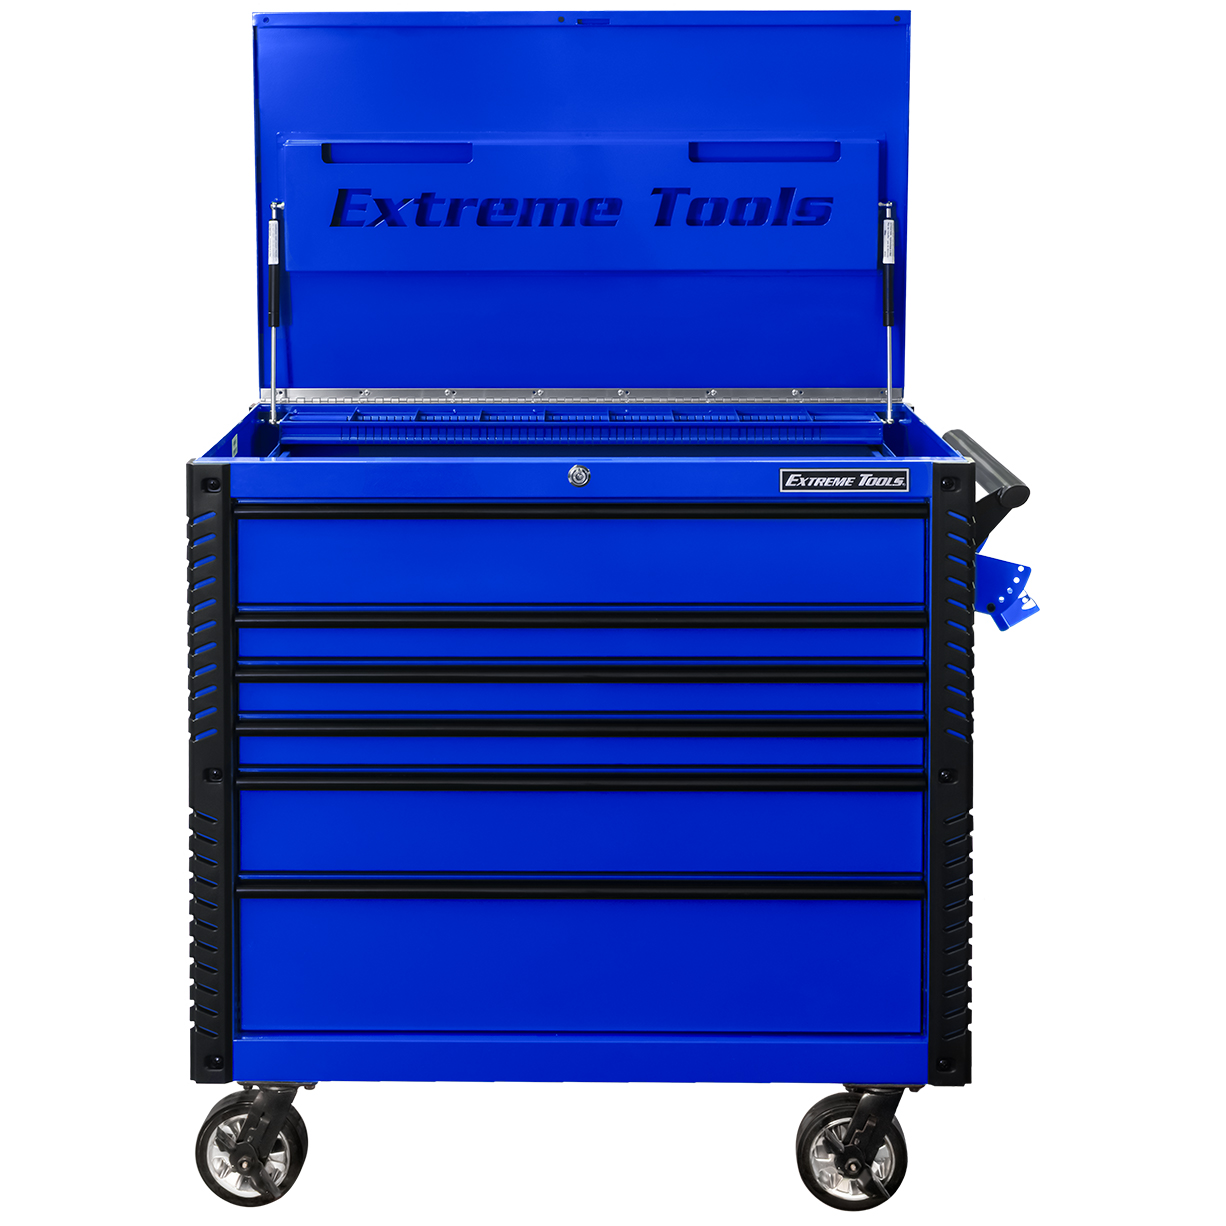 Extreme Tools EX4106TCBLBK 41 6 Drawer Tool Cart - Blue with Black Drawer Pulls